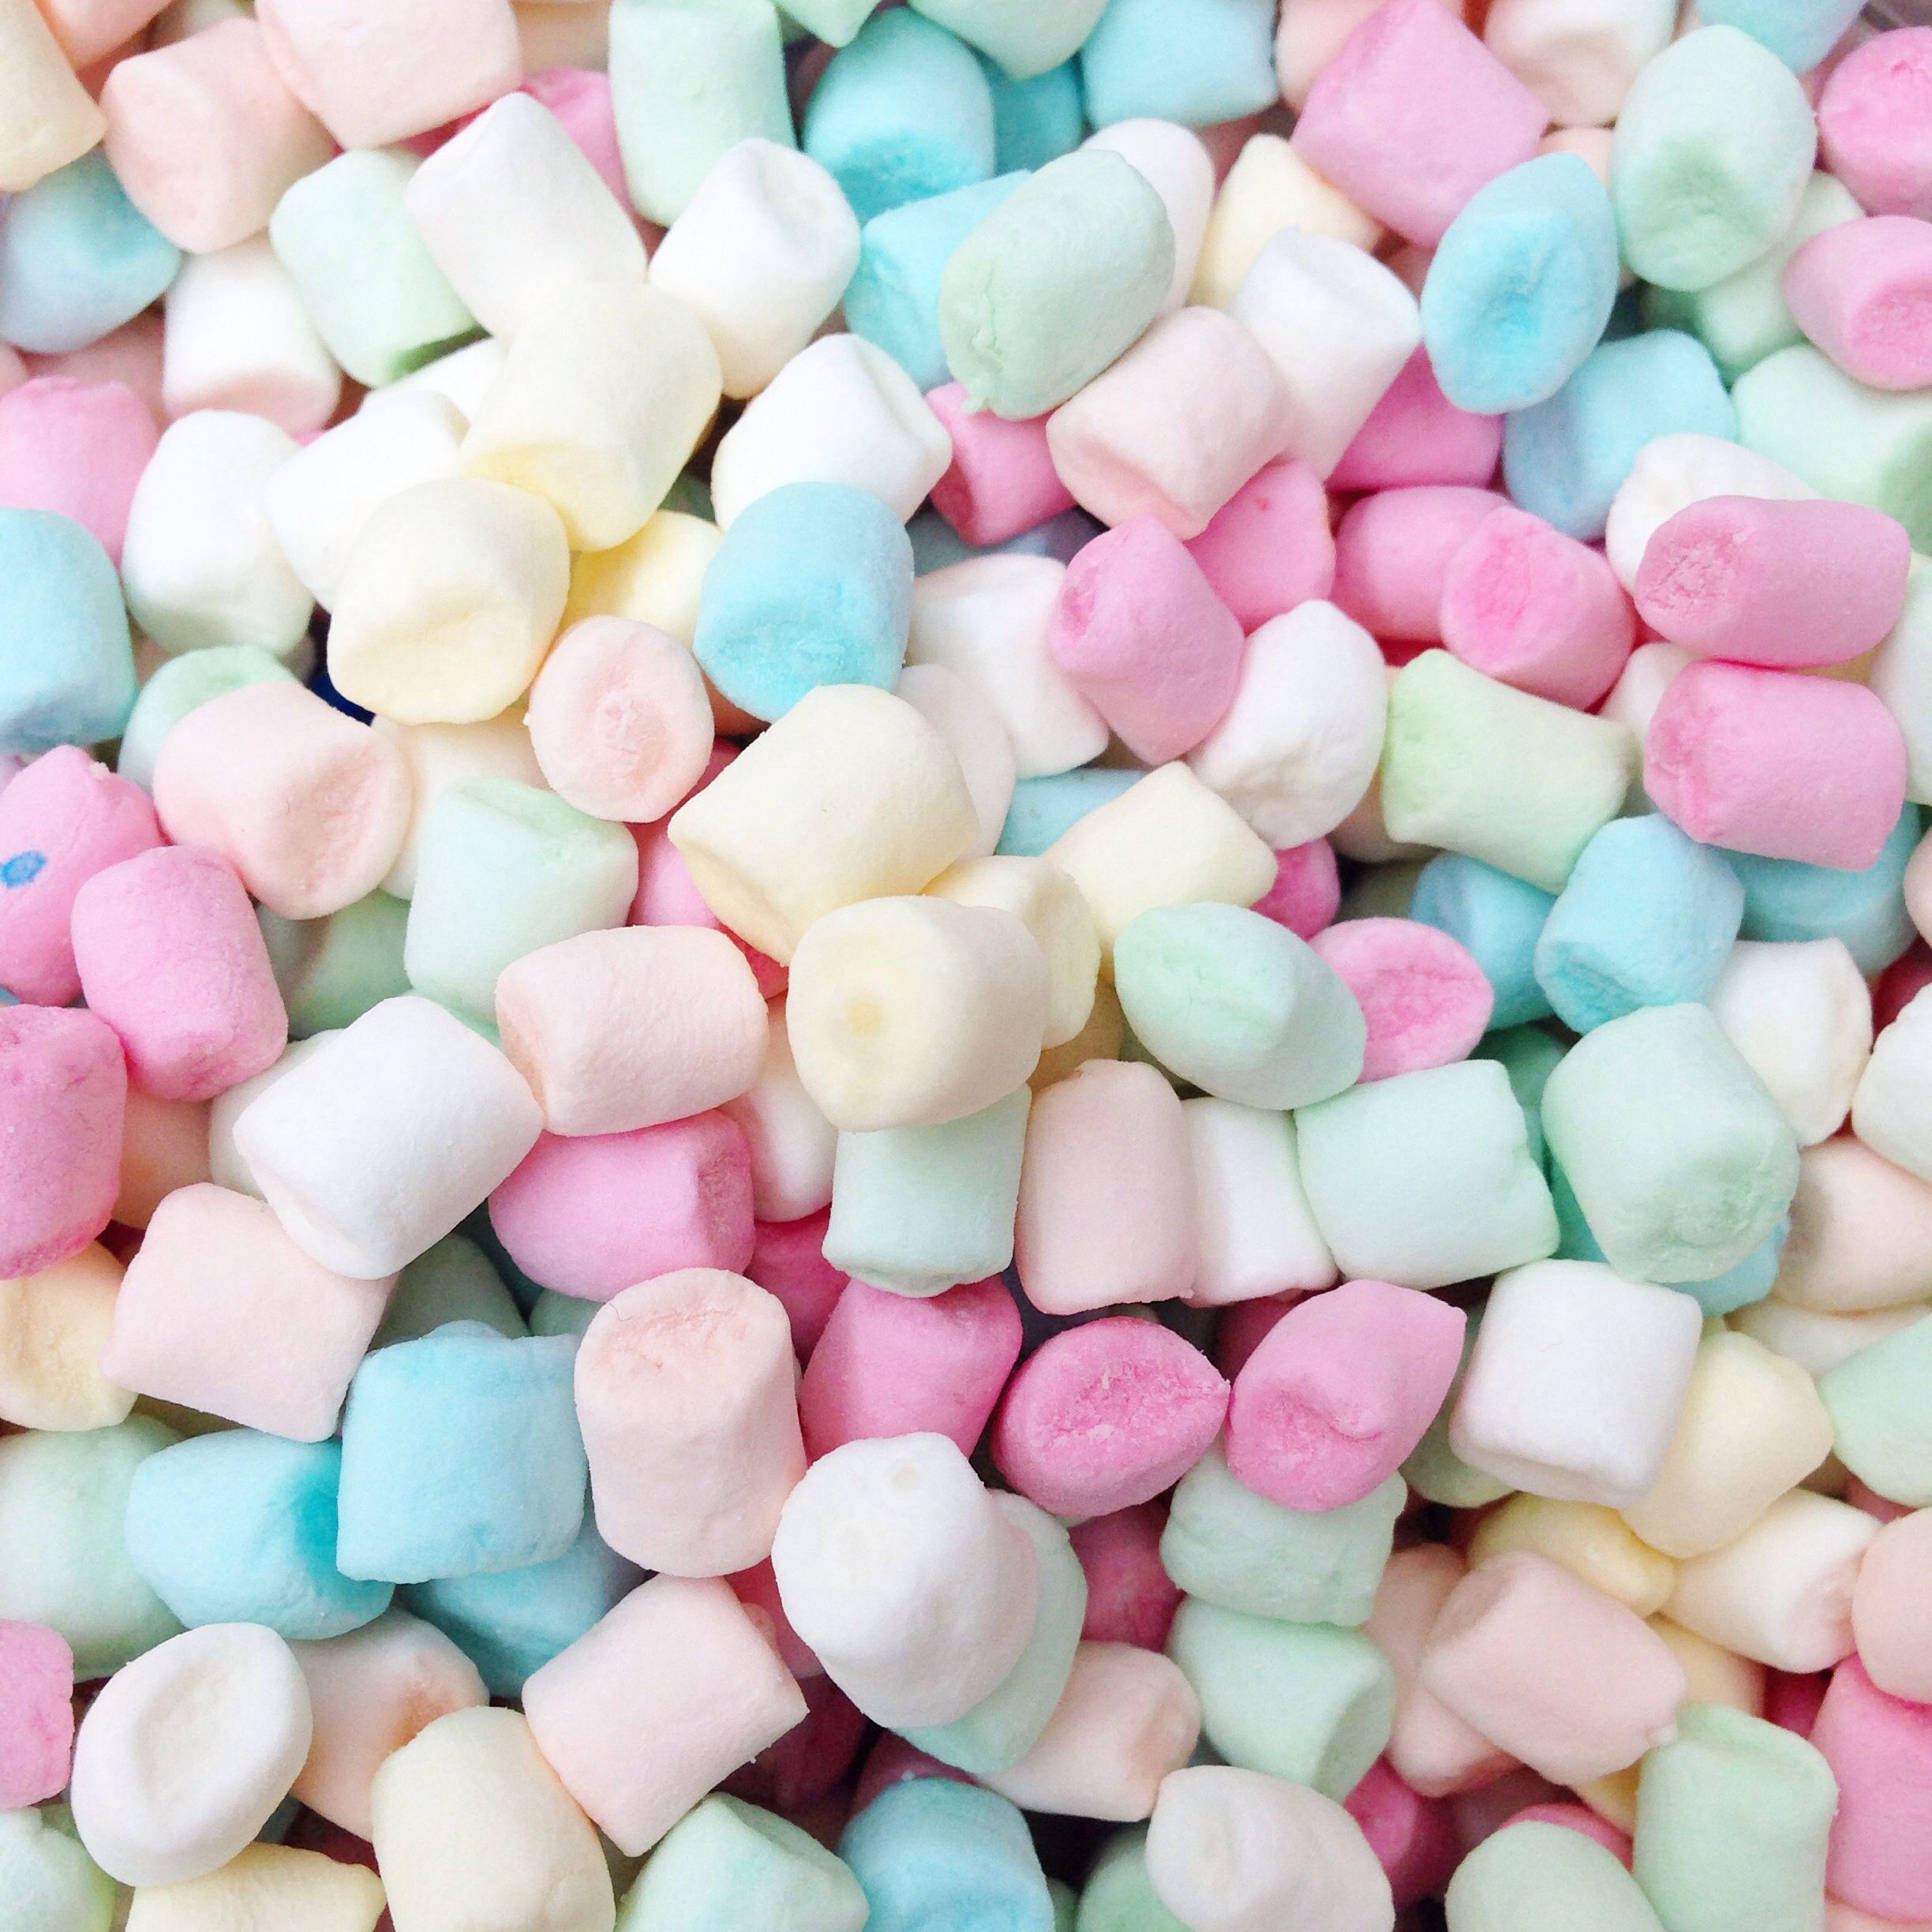 Sticky candy, Colorful candy, Favorite candy